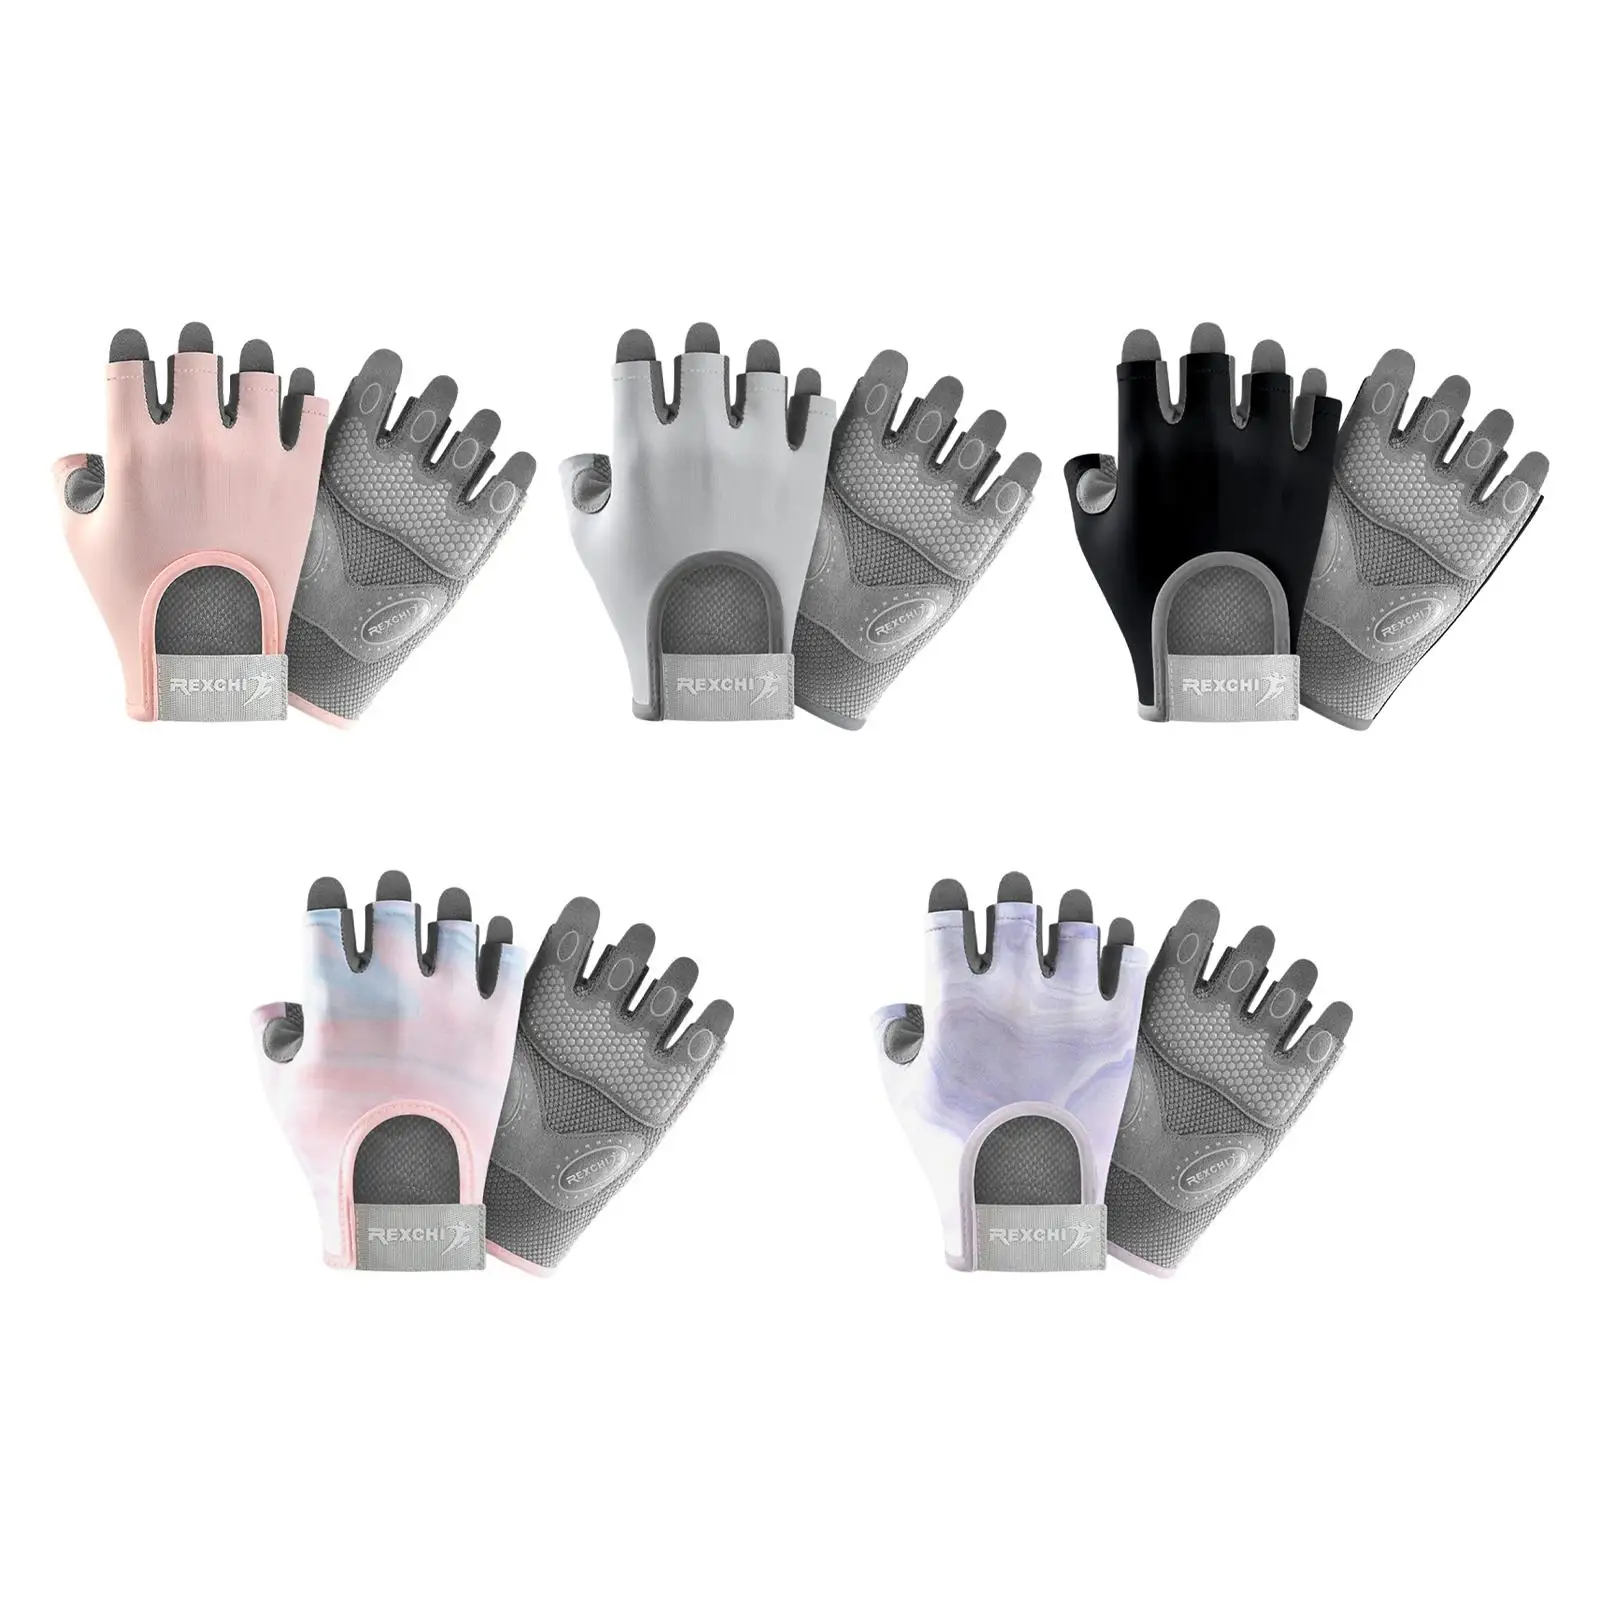 Cycling Bike Gloves Women Men 1 Pair Non Slip Weight Lifting Workout Gloves Sports Half Finger Gloves Bicycle Gloves for Outdoor